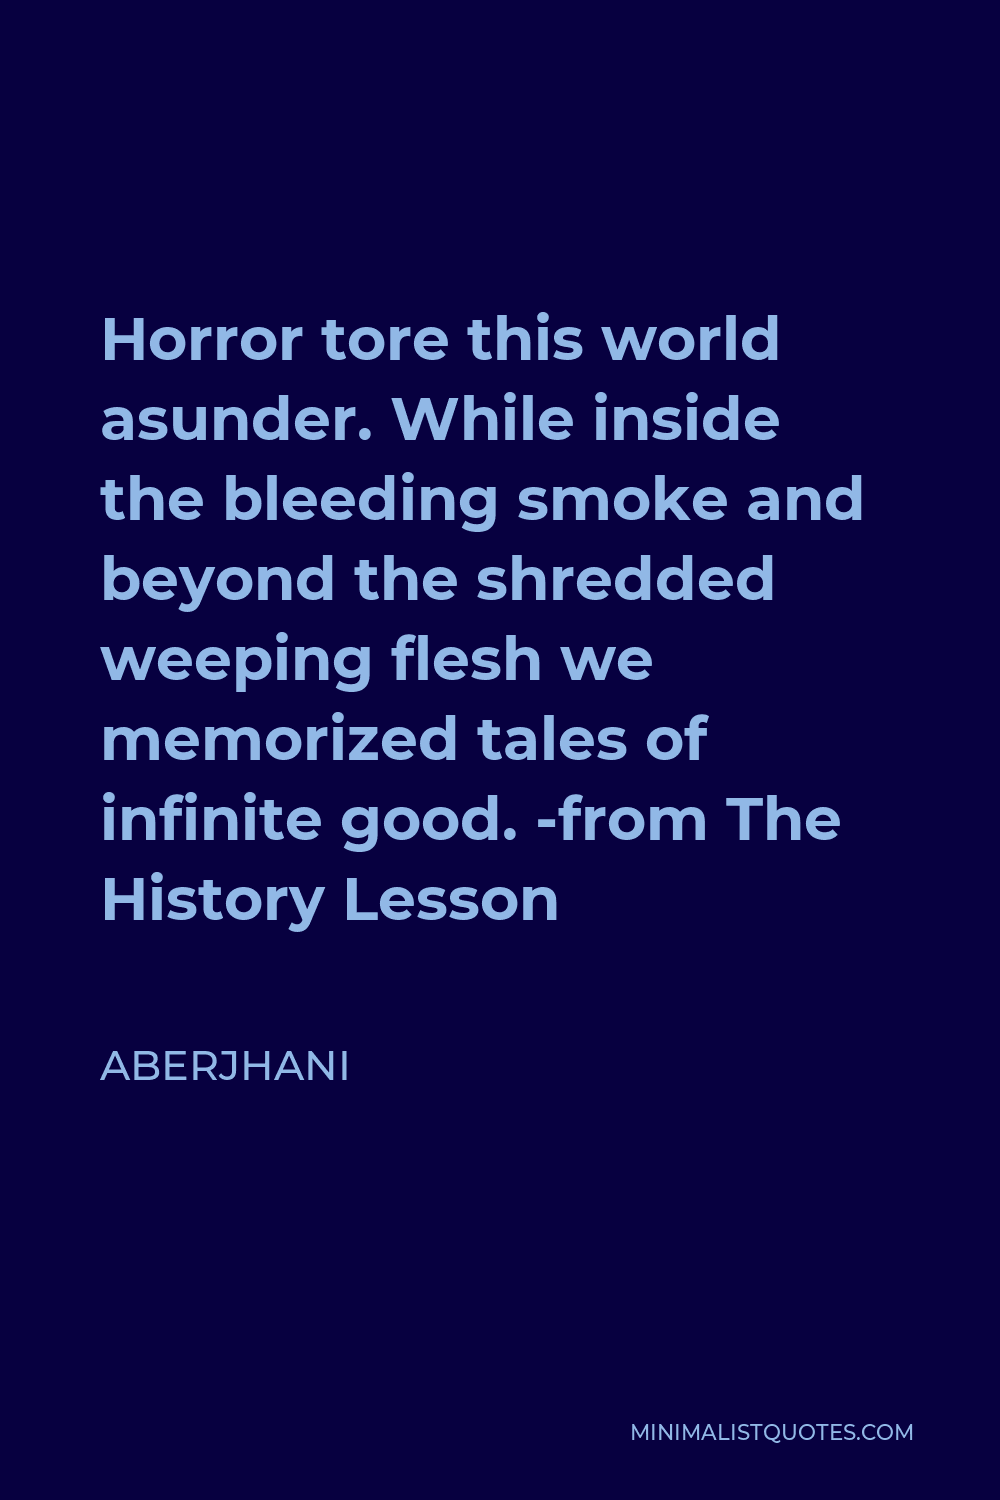 Aberjhani Quote - Horror tore this world asunder. While inside the bleeding smoke and beyond the shredded weeping flesh we memorized tales of infinite good. -from The History Lesson